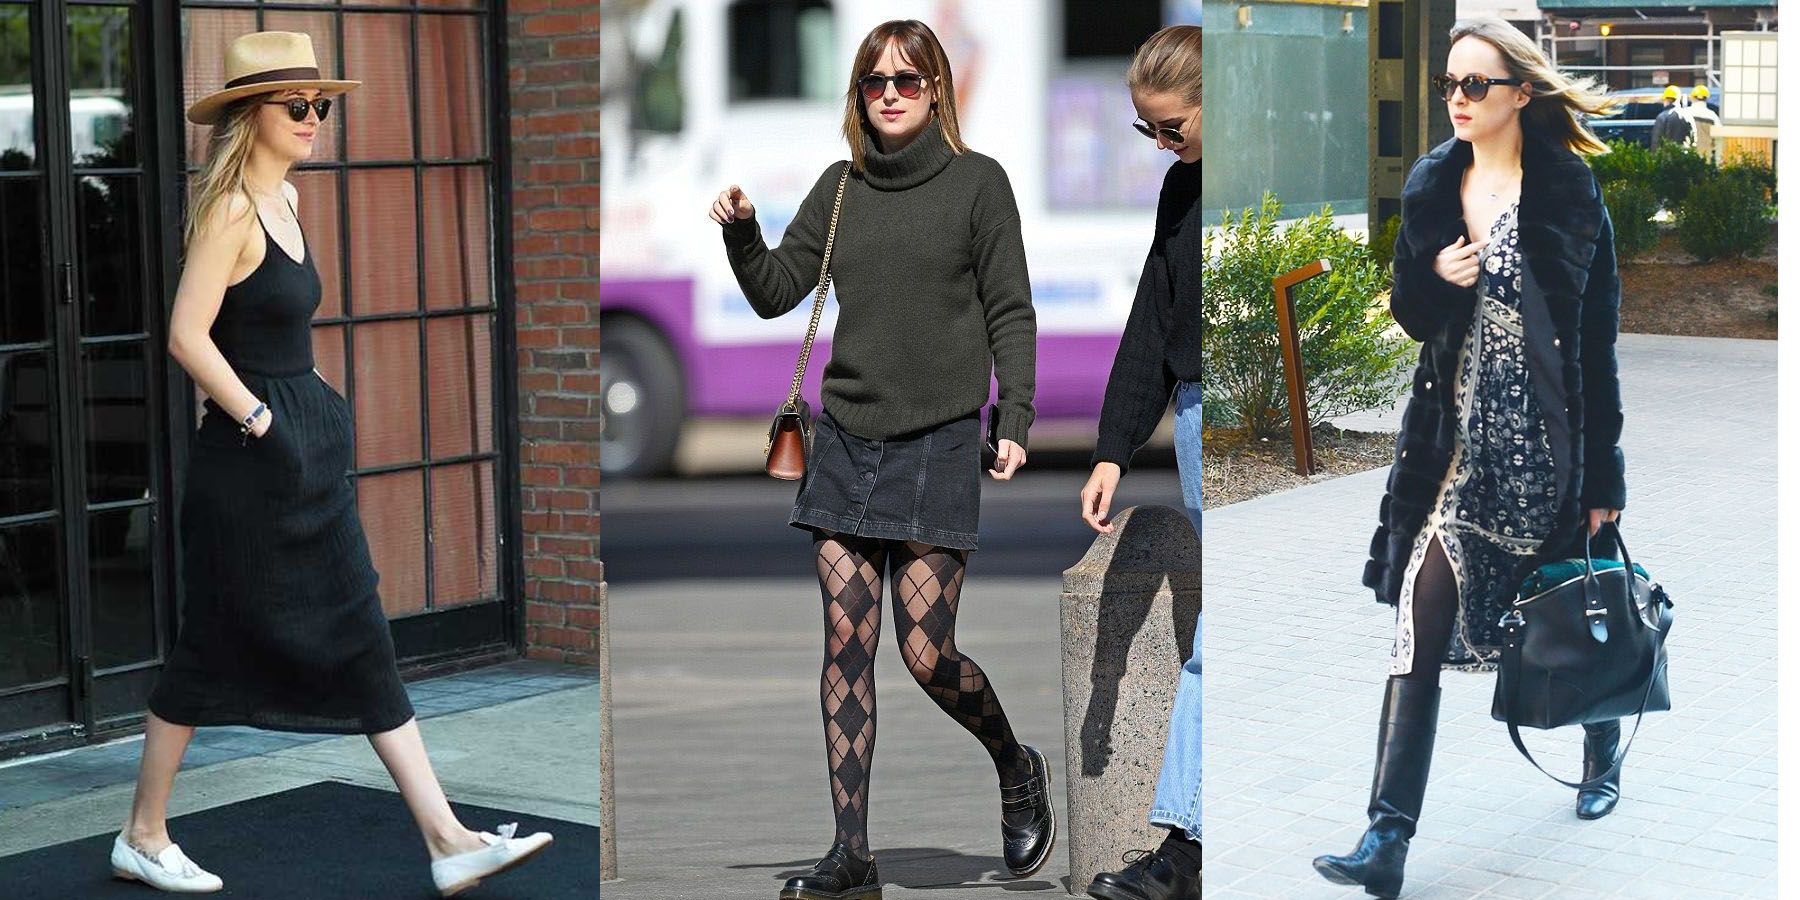 Inspirational!  Here's Dakota Johnson's Red Carpet Style, Casual, & Dating Time